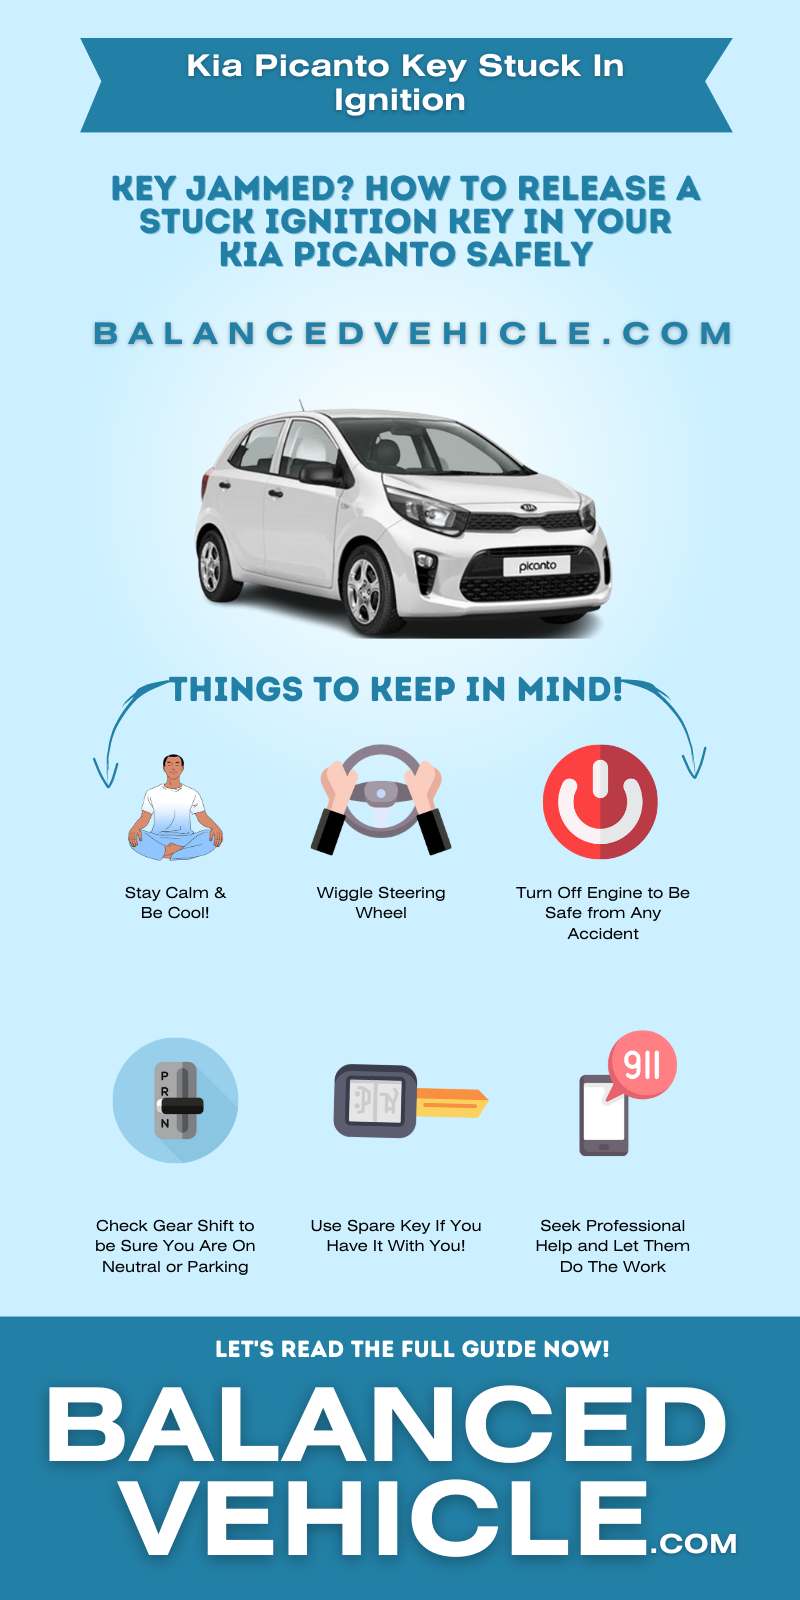 Kia Picanto Key Stuck In Ignition Infographic Guided By BalancedVehicle.com